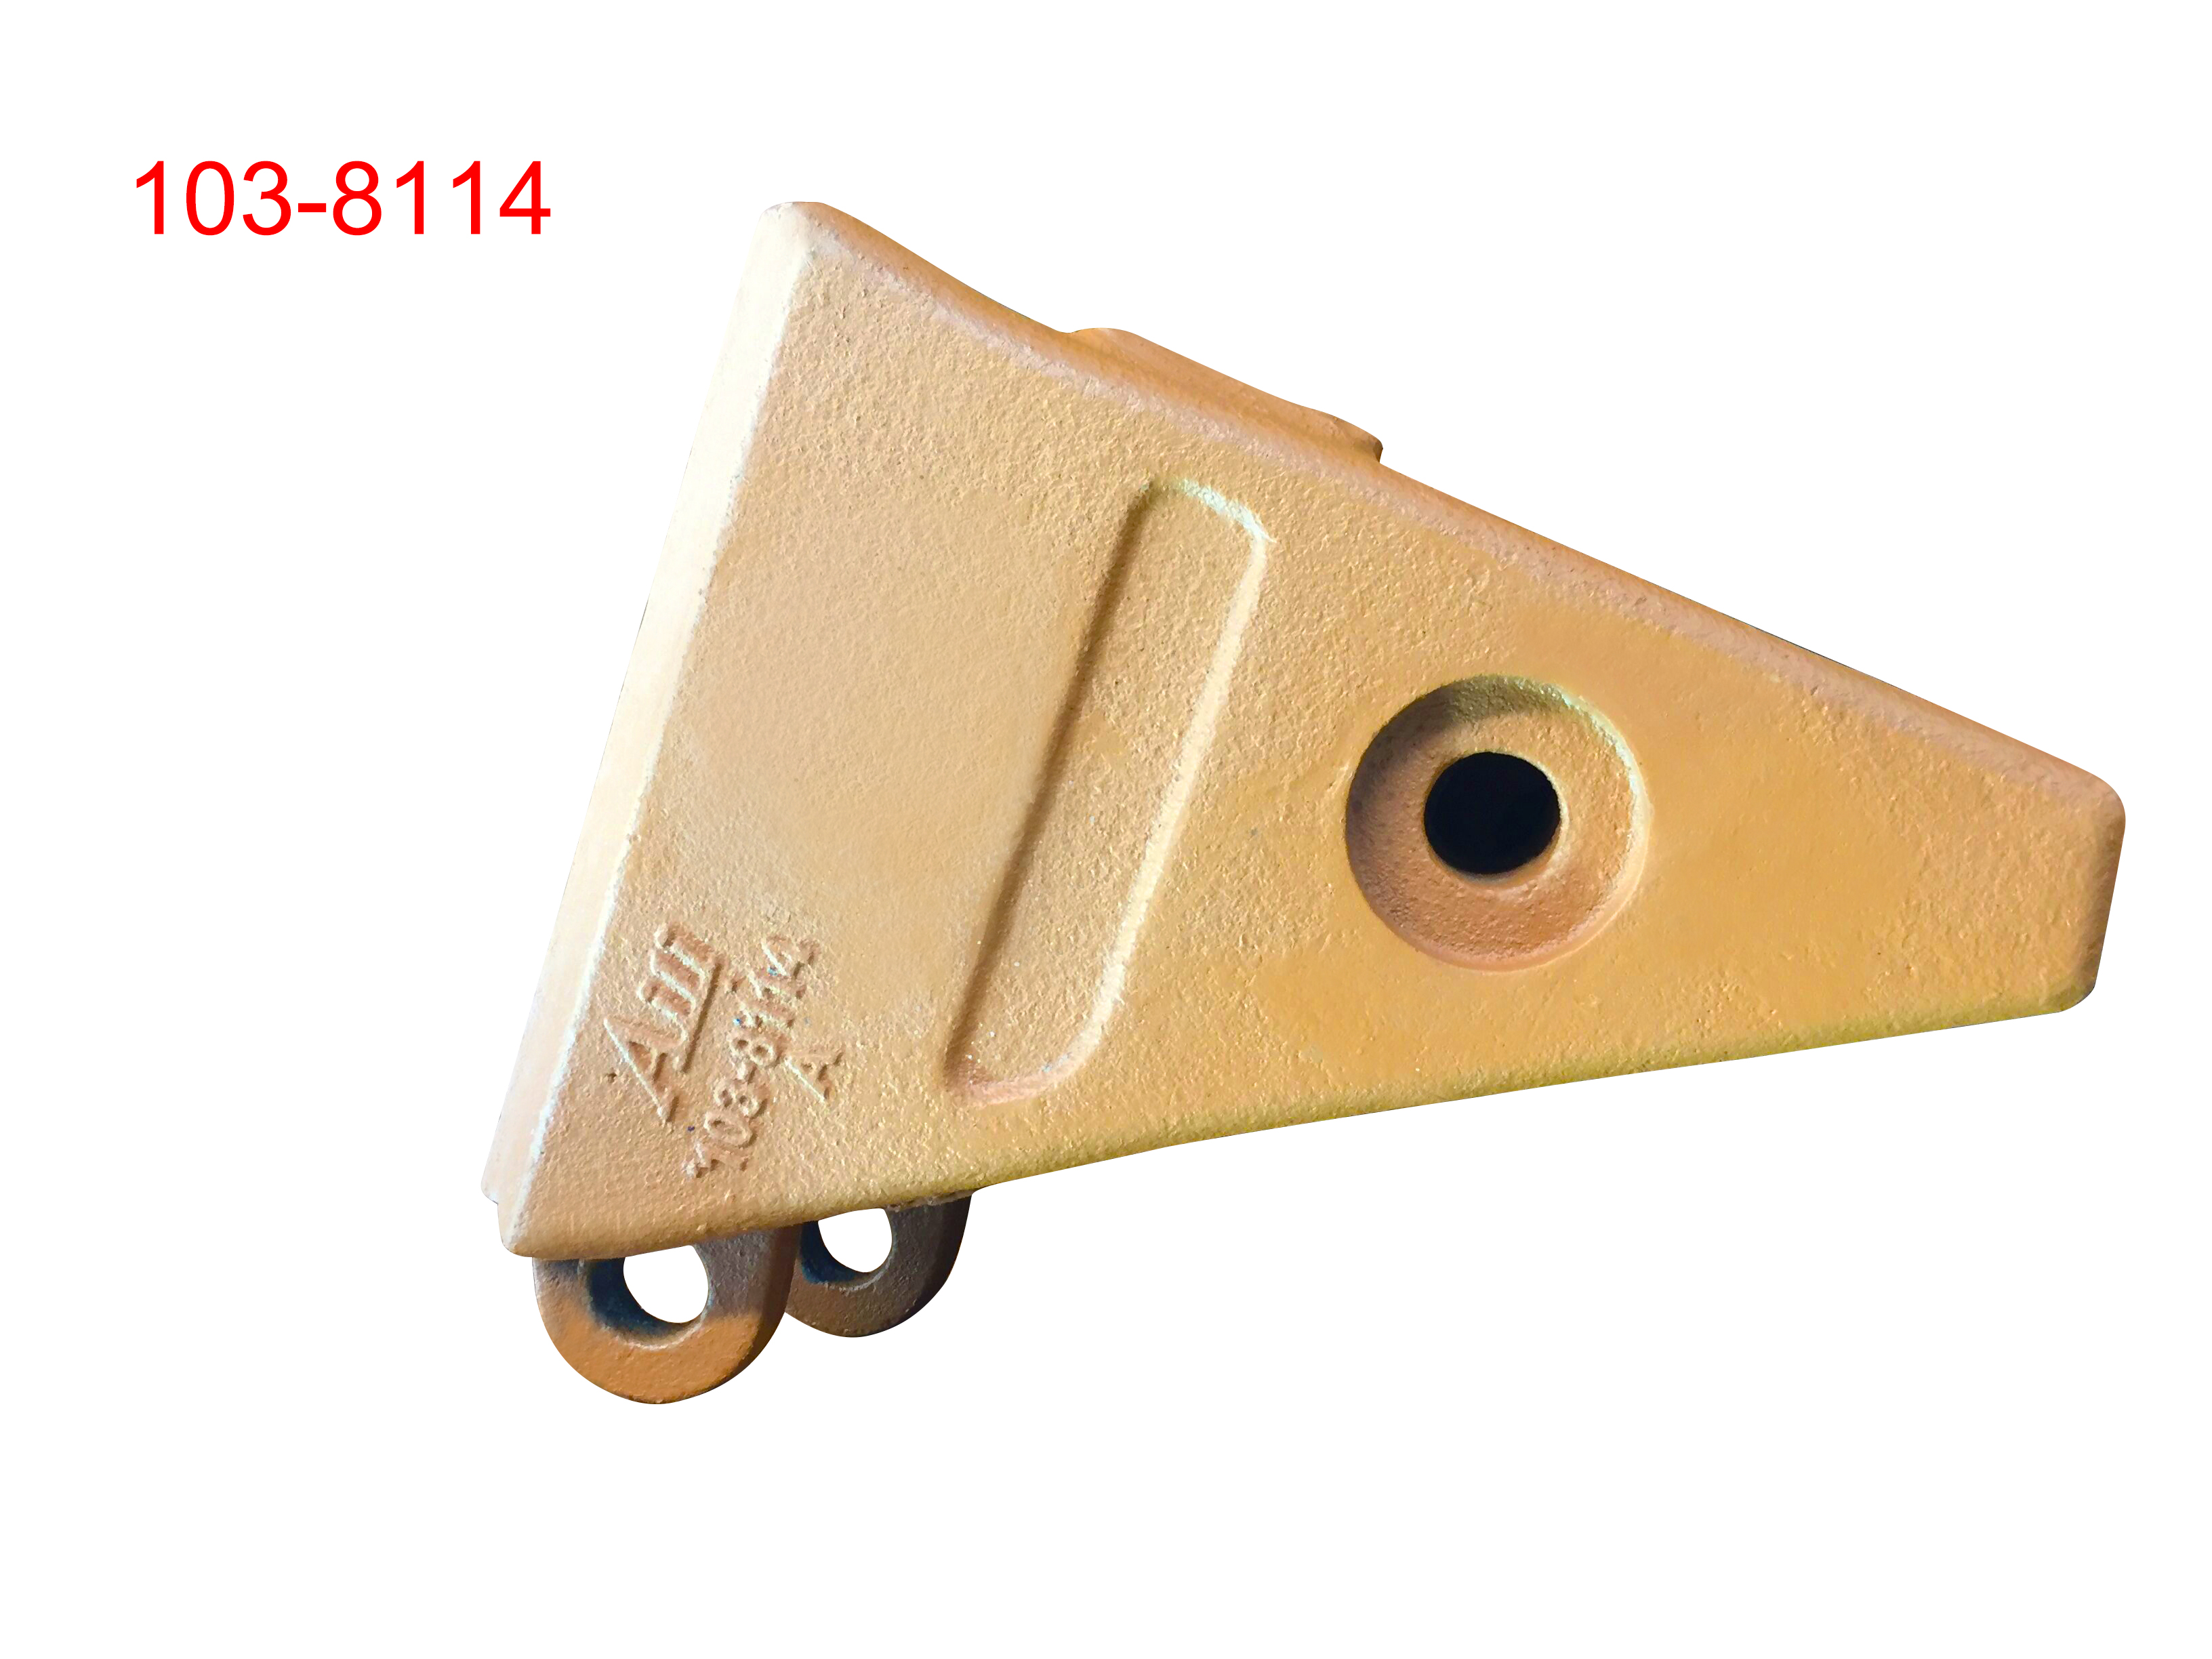 CAT 103-8114 adapter is suitable for caterpillar R500/D90 series 2-Hole Ripper Nose Piece